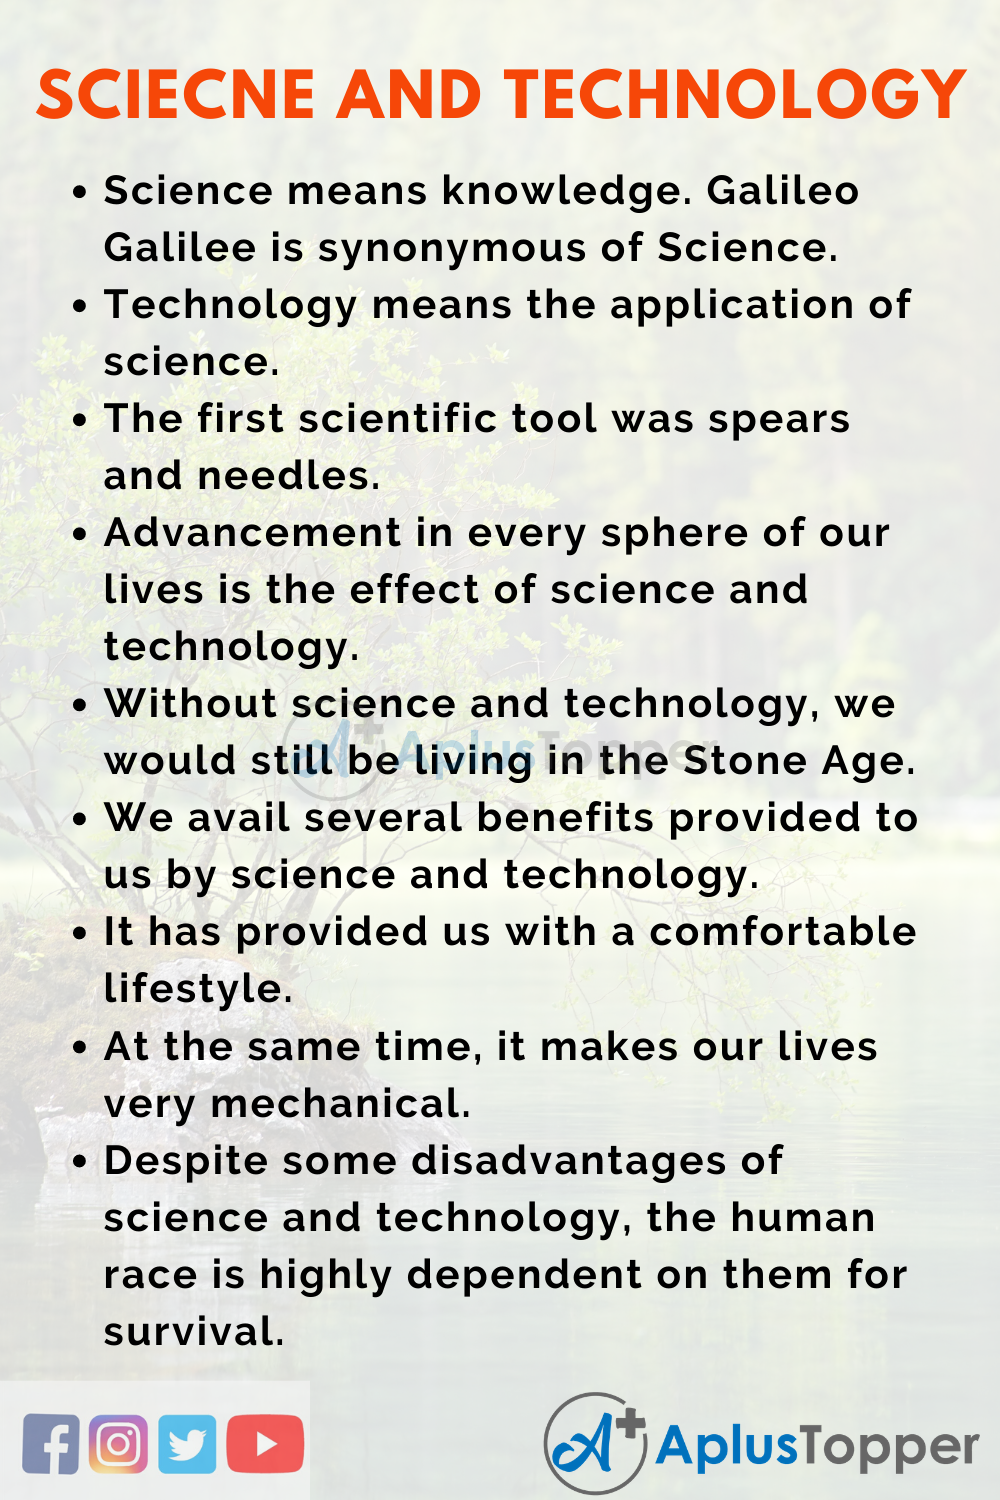 essay on science and future